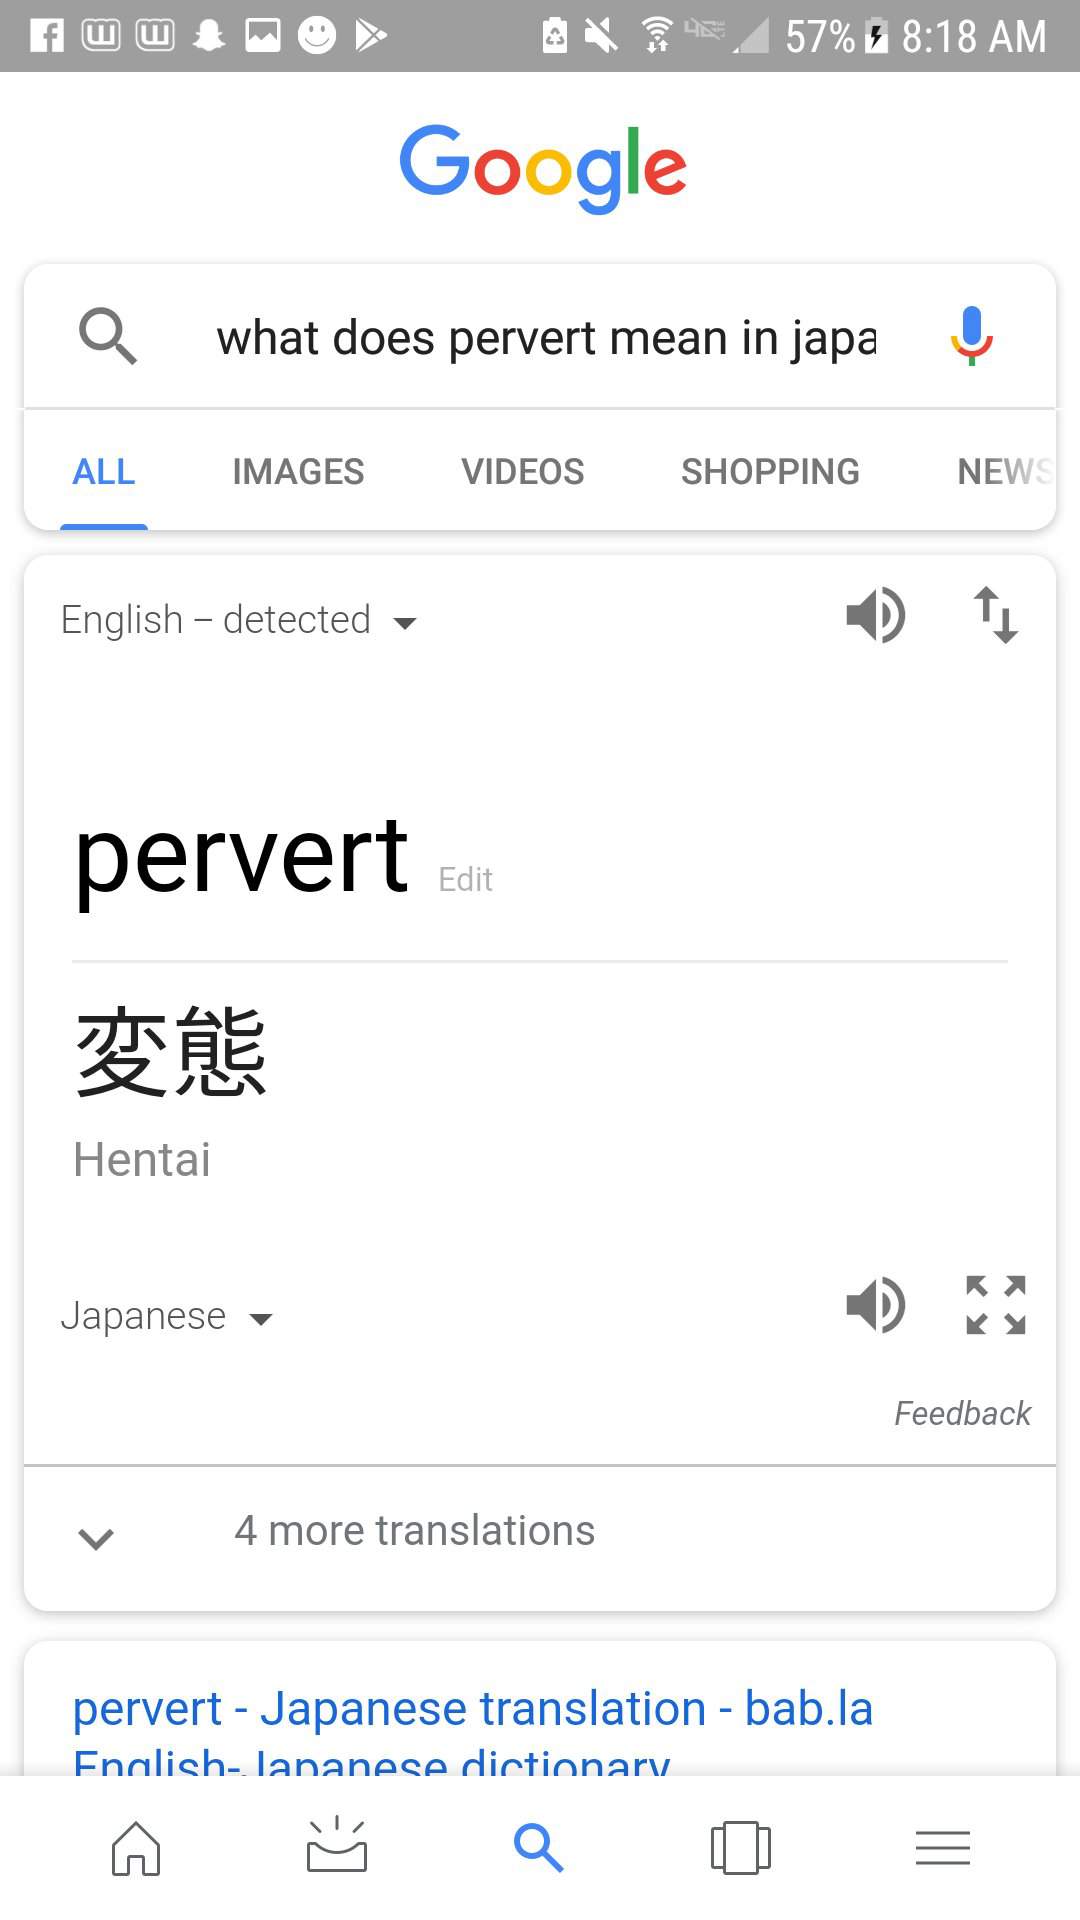 vanilla hentai category means